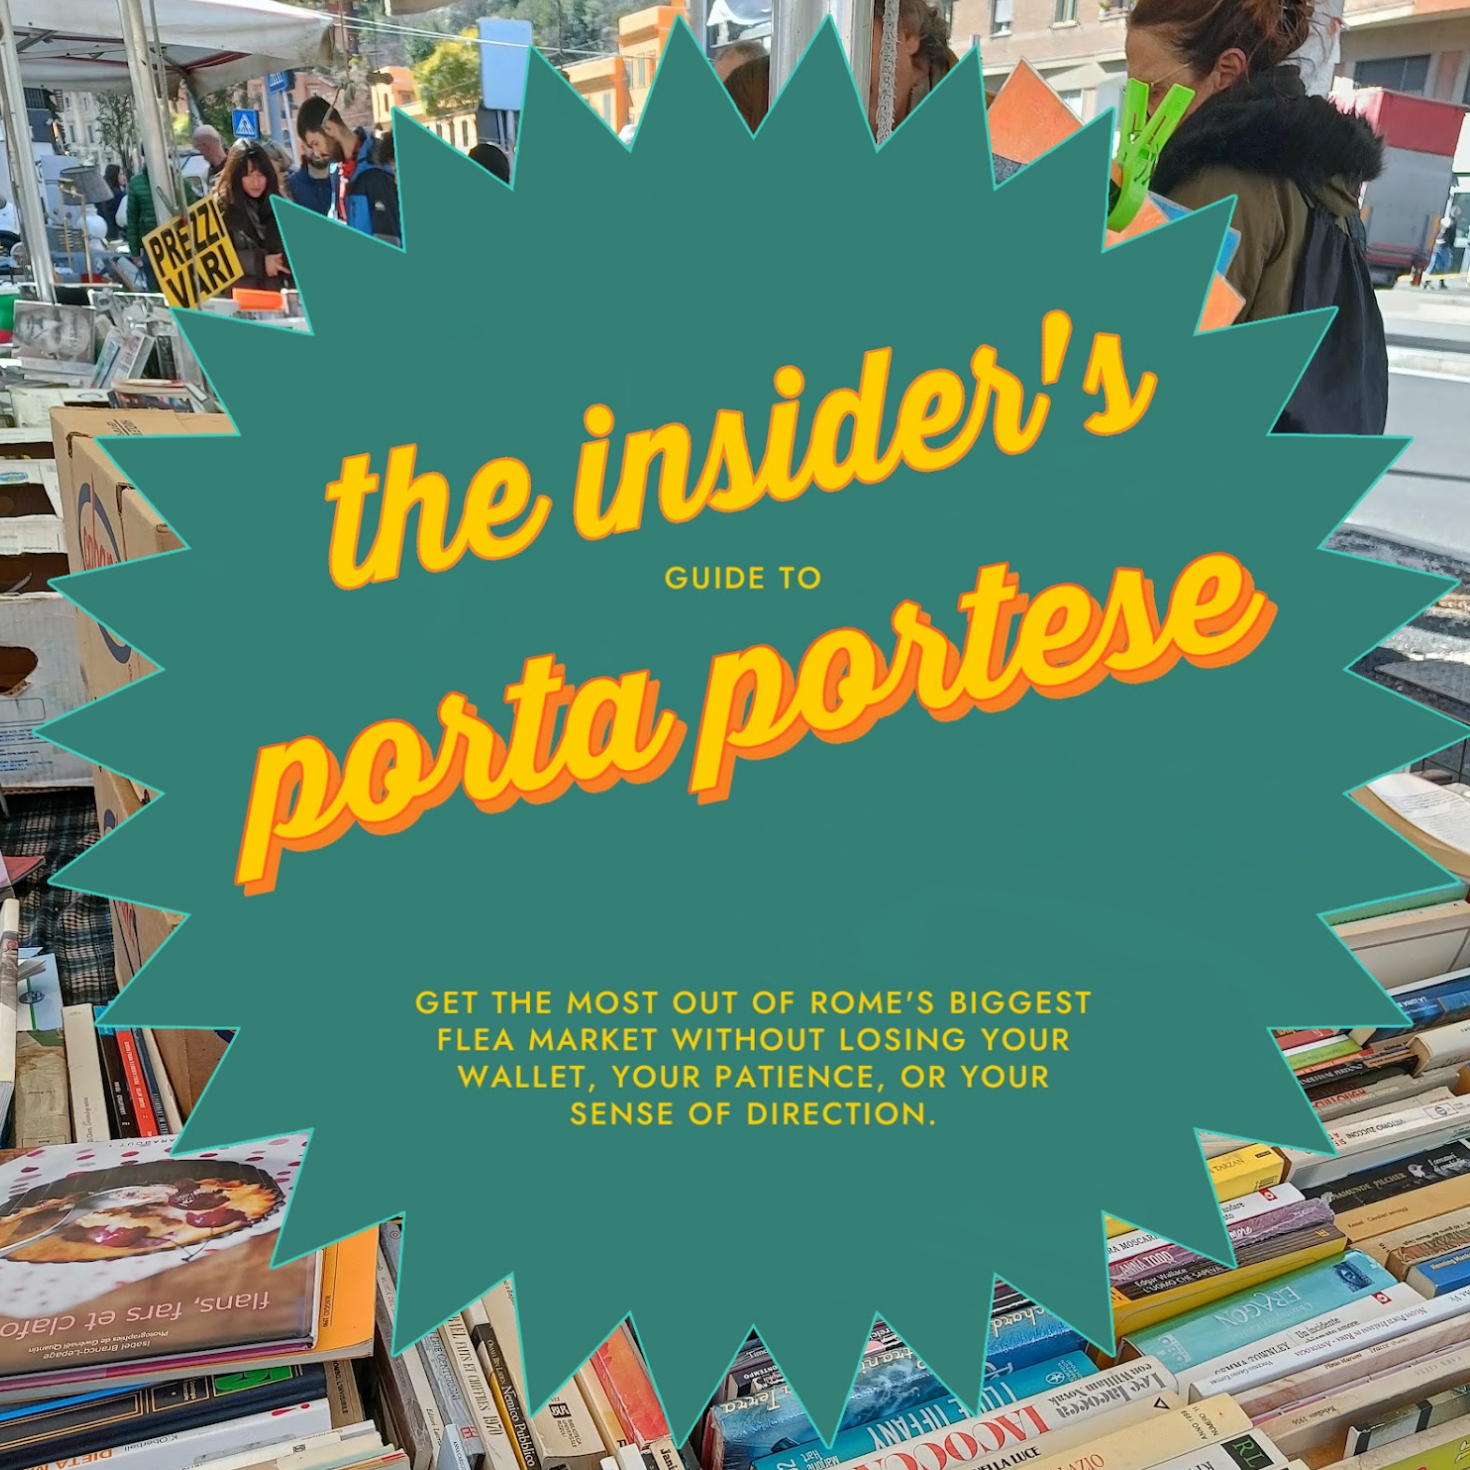 Bright yellow text on a teal background reads: The Insider's Guide to Porta Portese